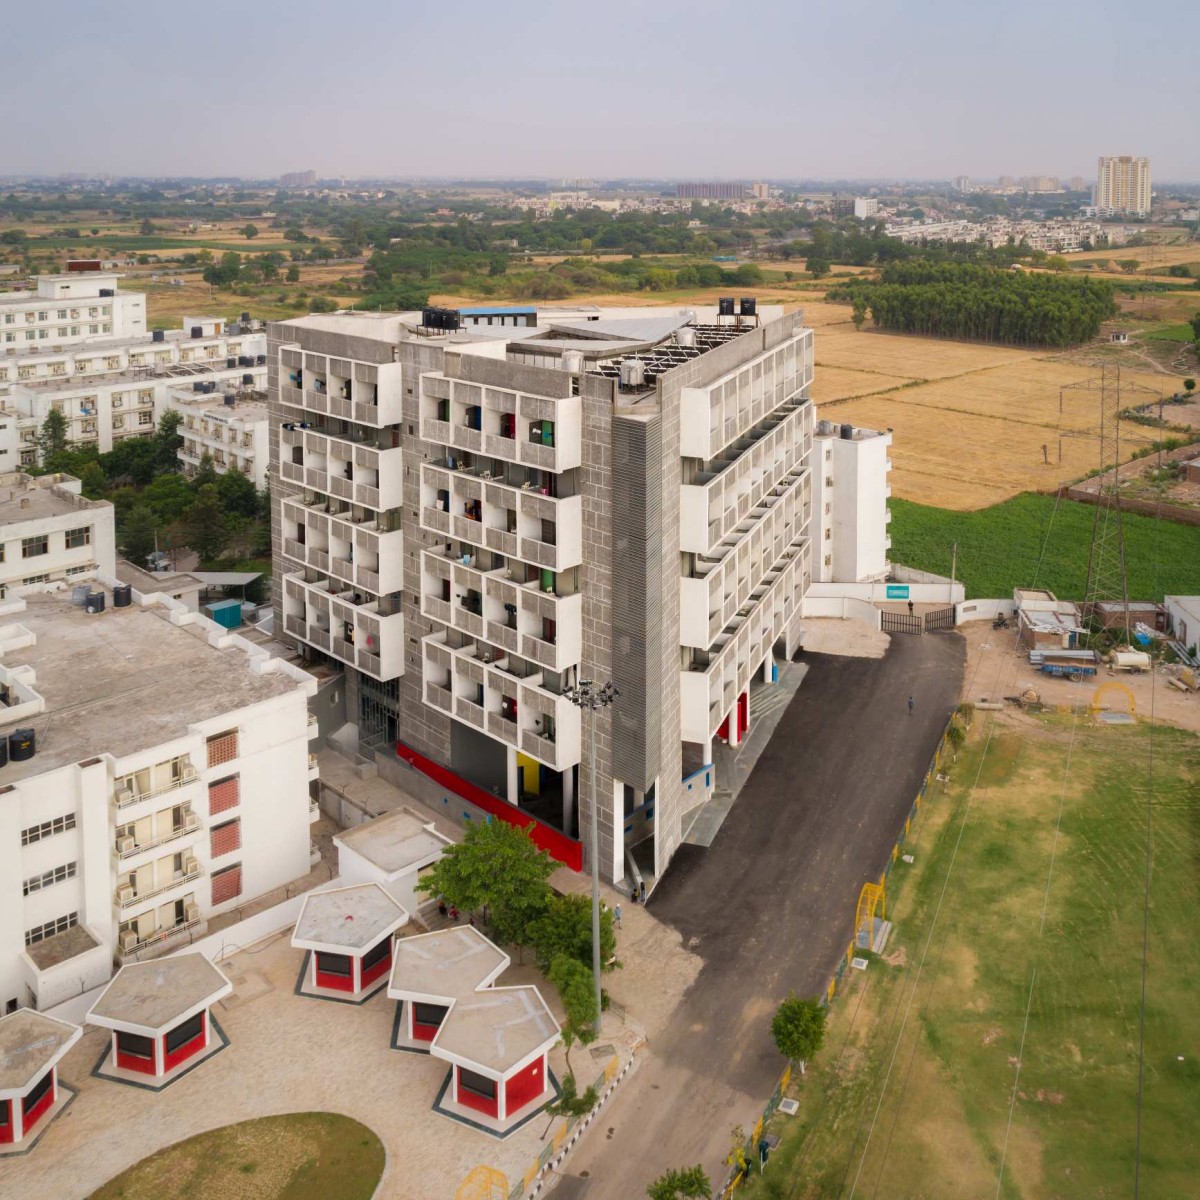 Bird eye view of CGC Student Hostel by Charged Voids